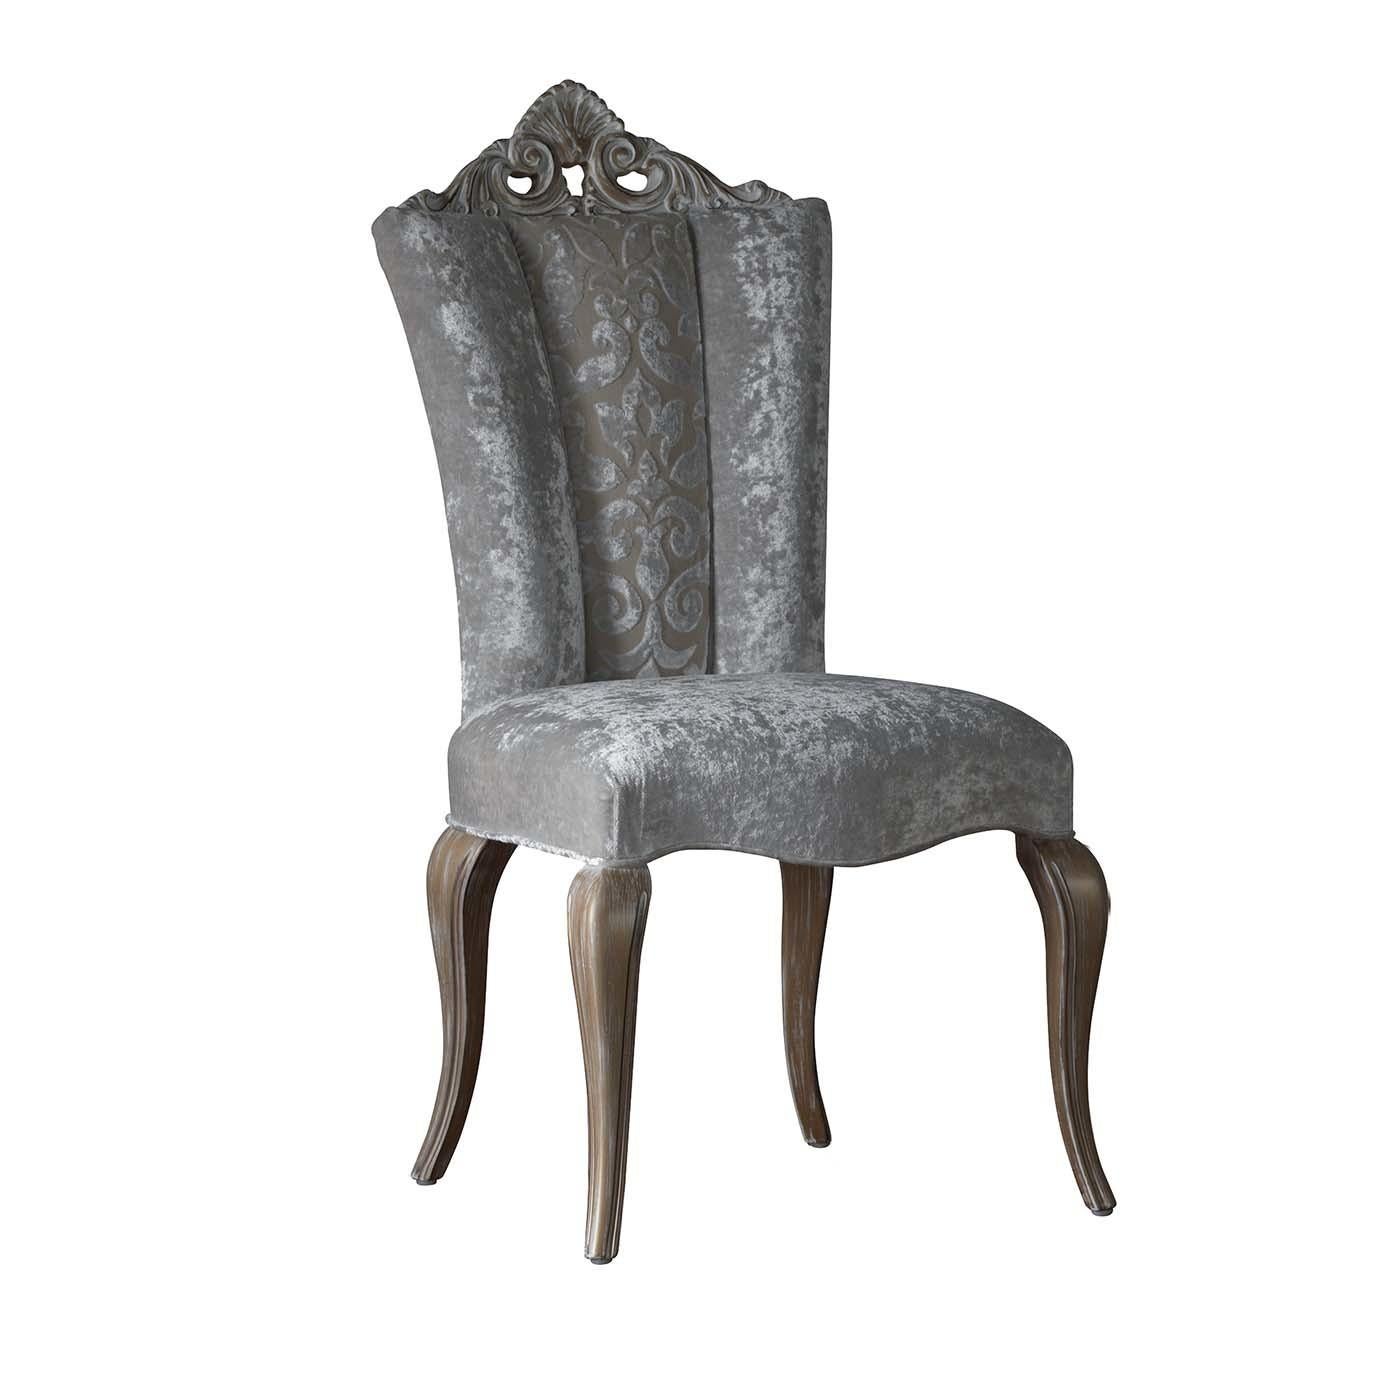 A sophisticated design for this Italian Baroque style dining chair, carved and decorated to become the decor highlight of the dining room or living room. The wooden Queen Anne style legs have a decapè finish for a striking solution. The seat and